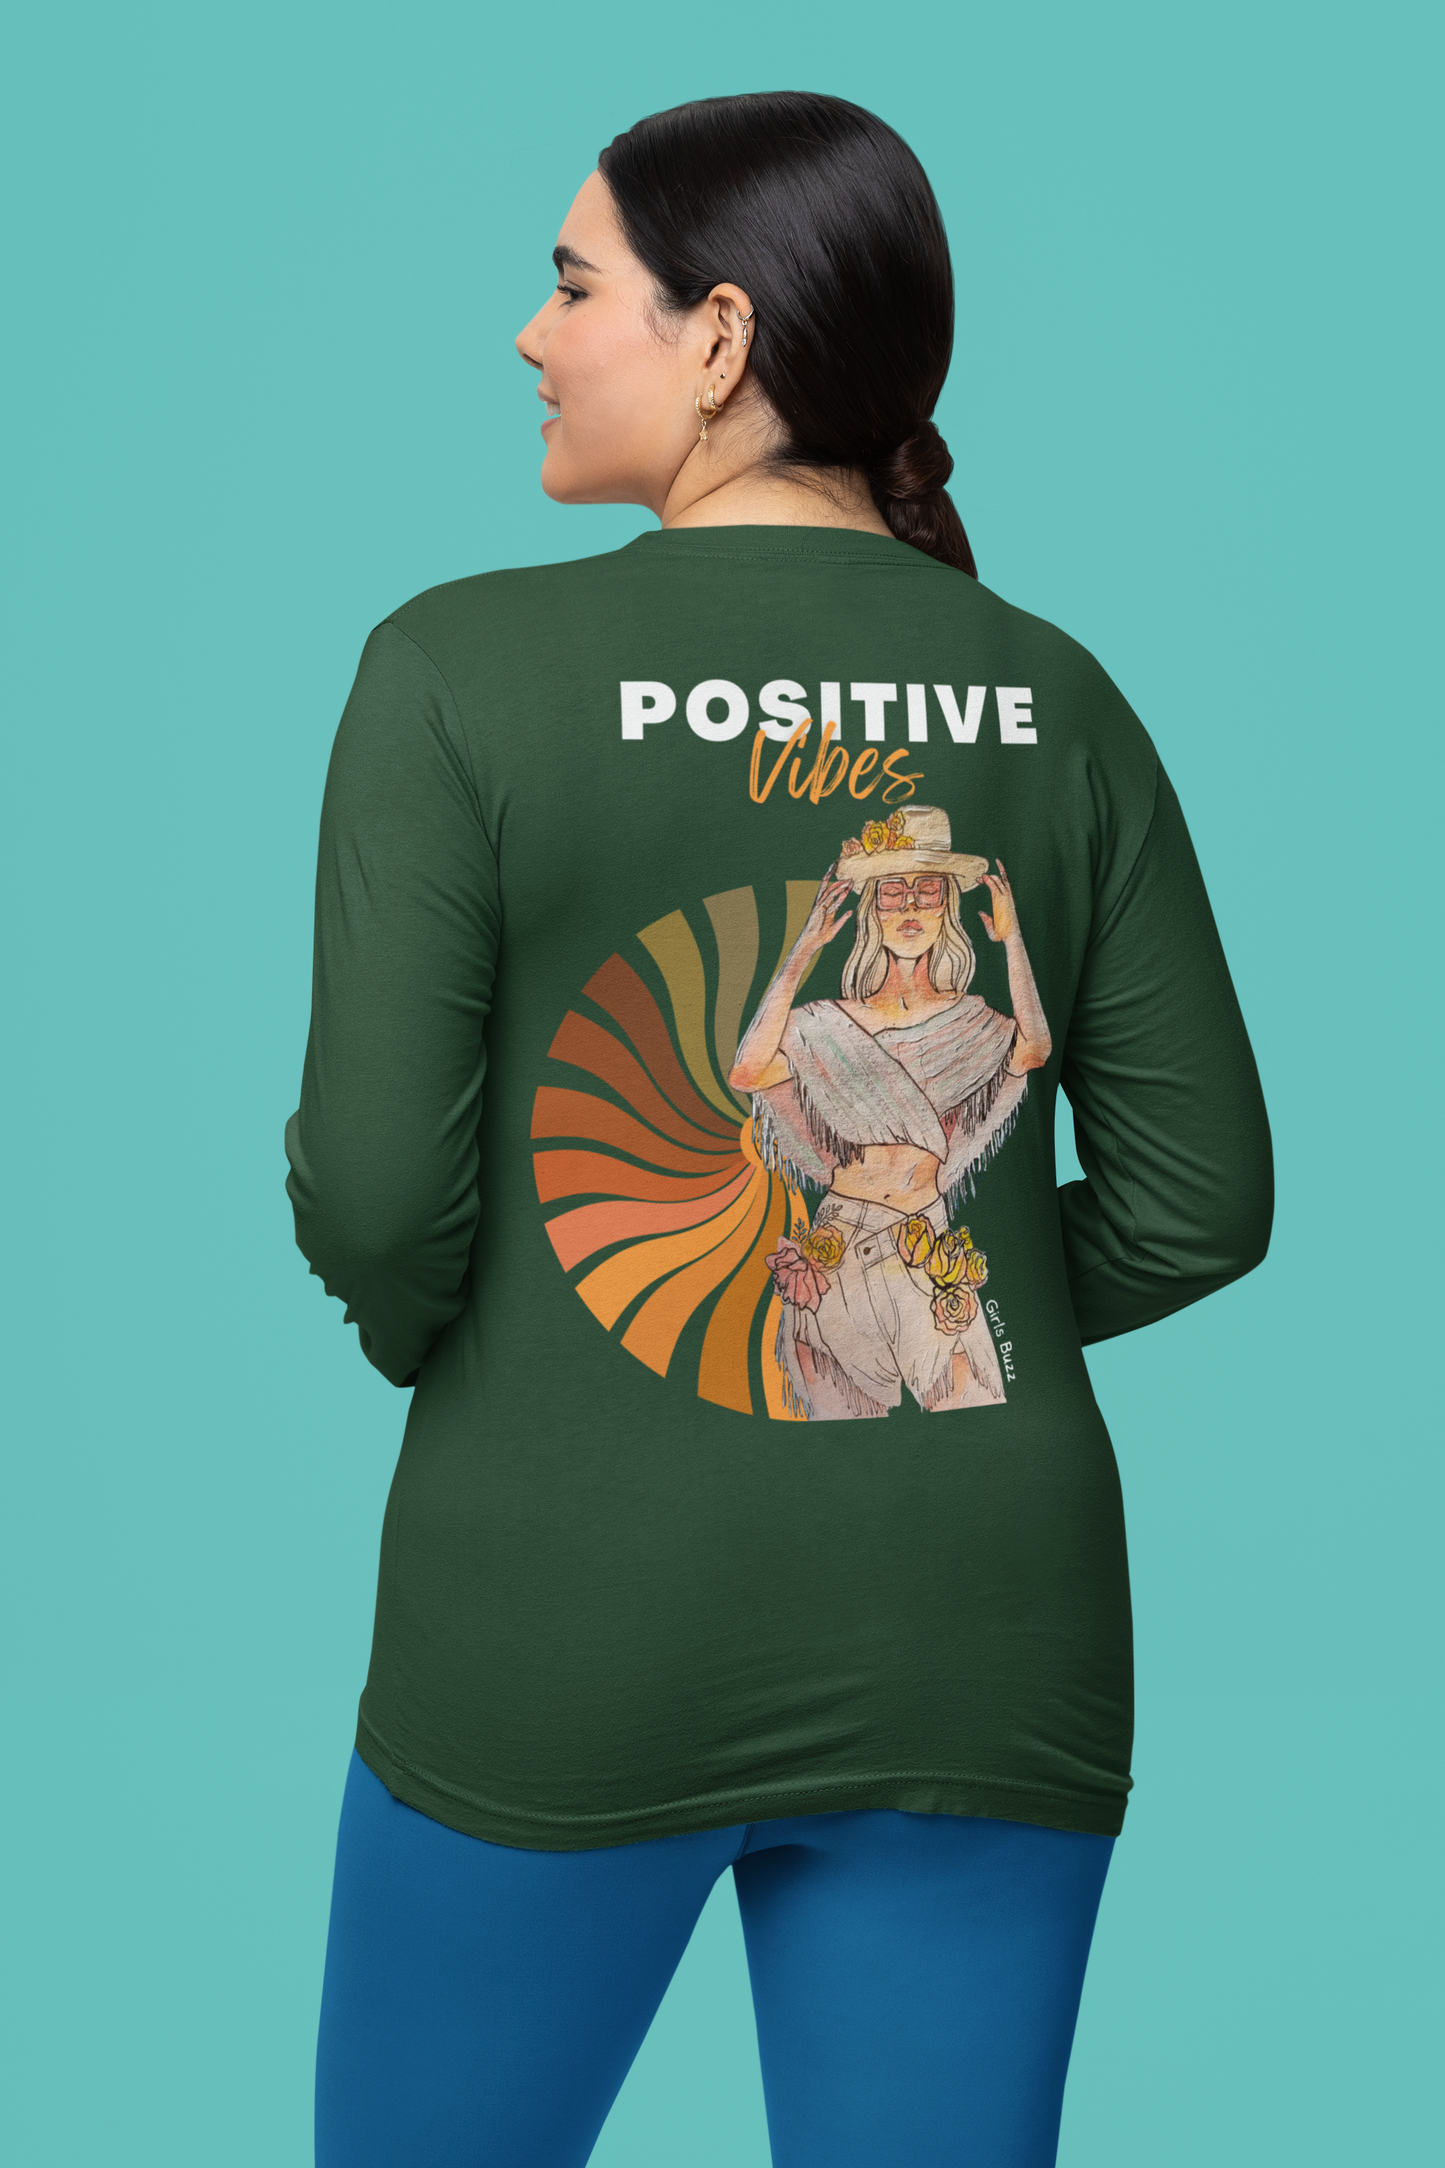 Positive Vibes Full Sleeves Back Printed T-shirt